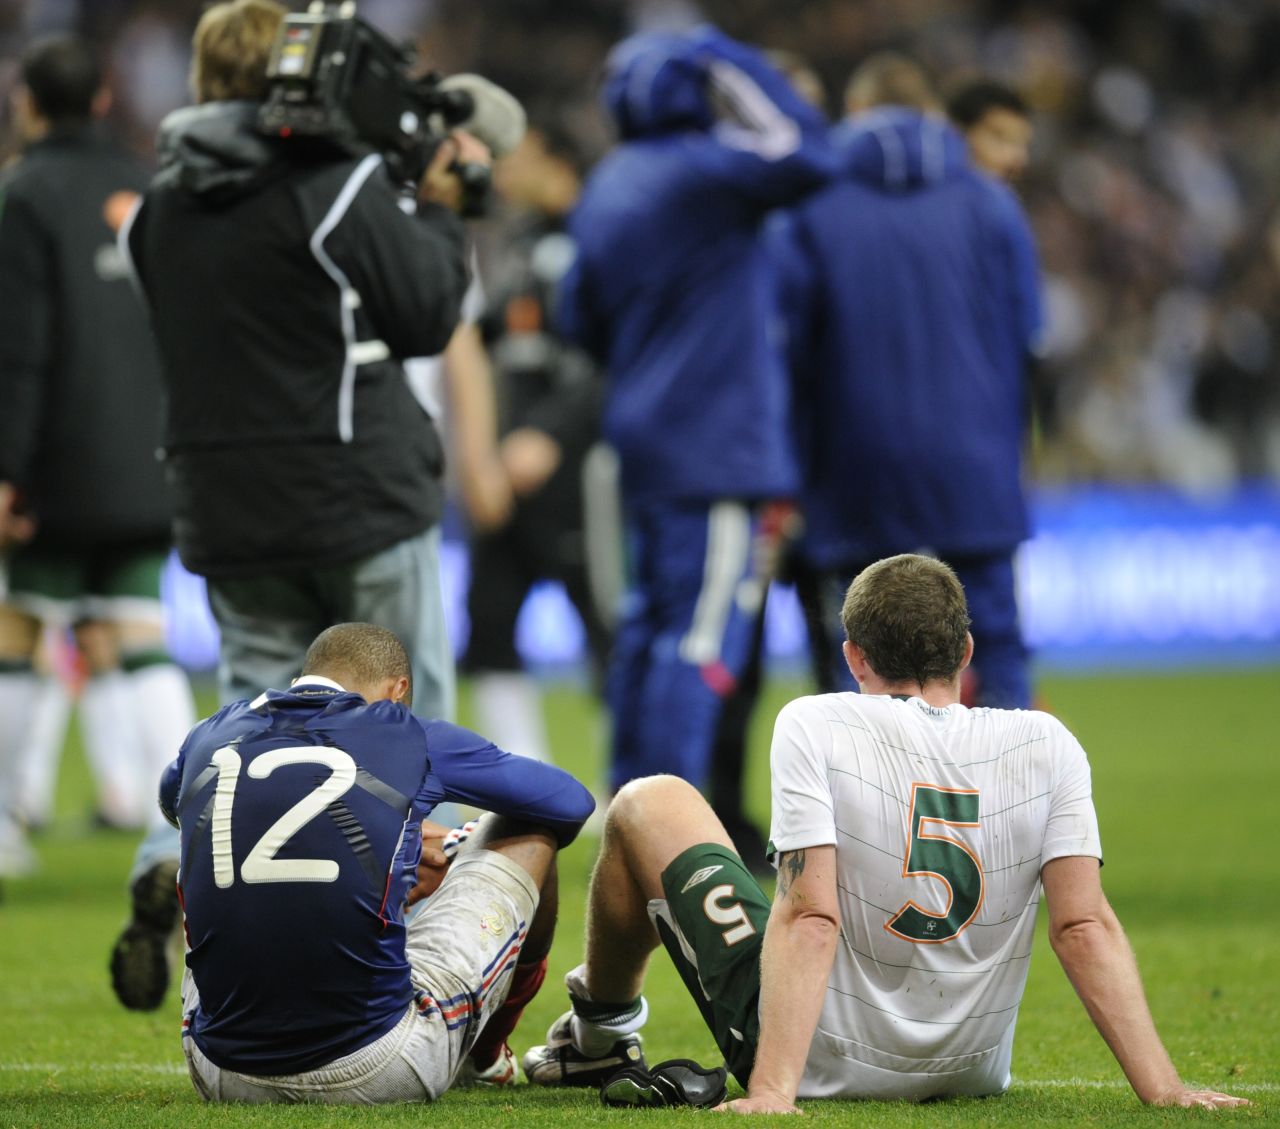 Thierry Henry sank Irish hopes of reaching the World Cup in Maradona-esque style. The striker handled the ball in the buildup to William Gallas' goal in a 1-1 second-leg draw in Paris, earning France a 2-1 aggregate playoff win and a place at the 2010 World Cup.